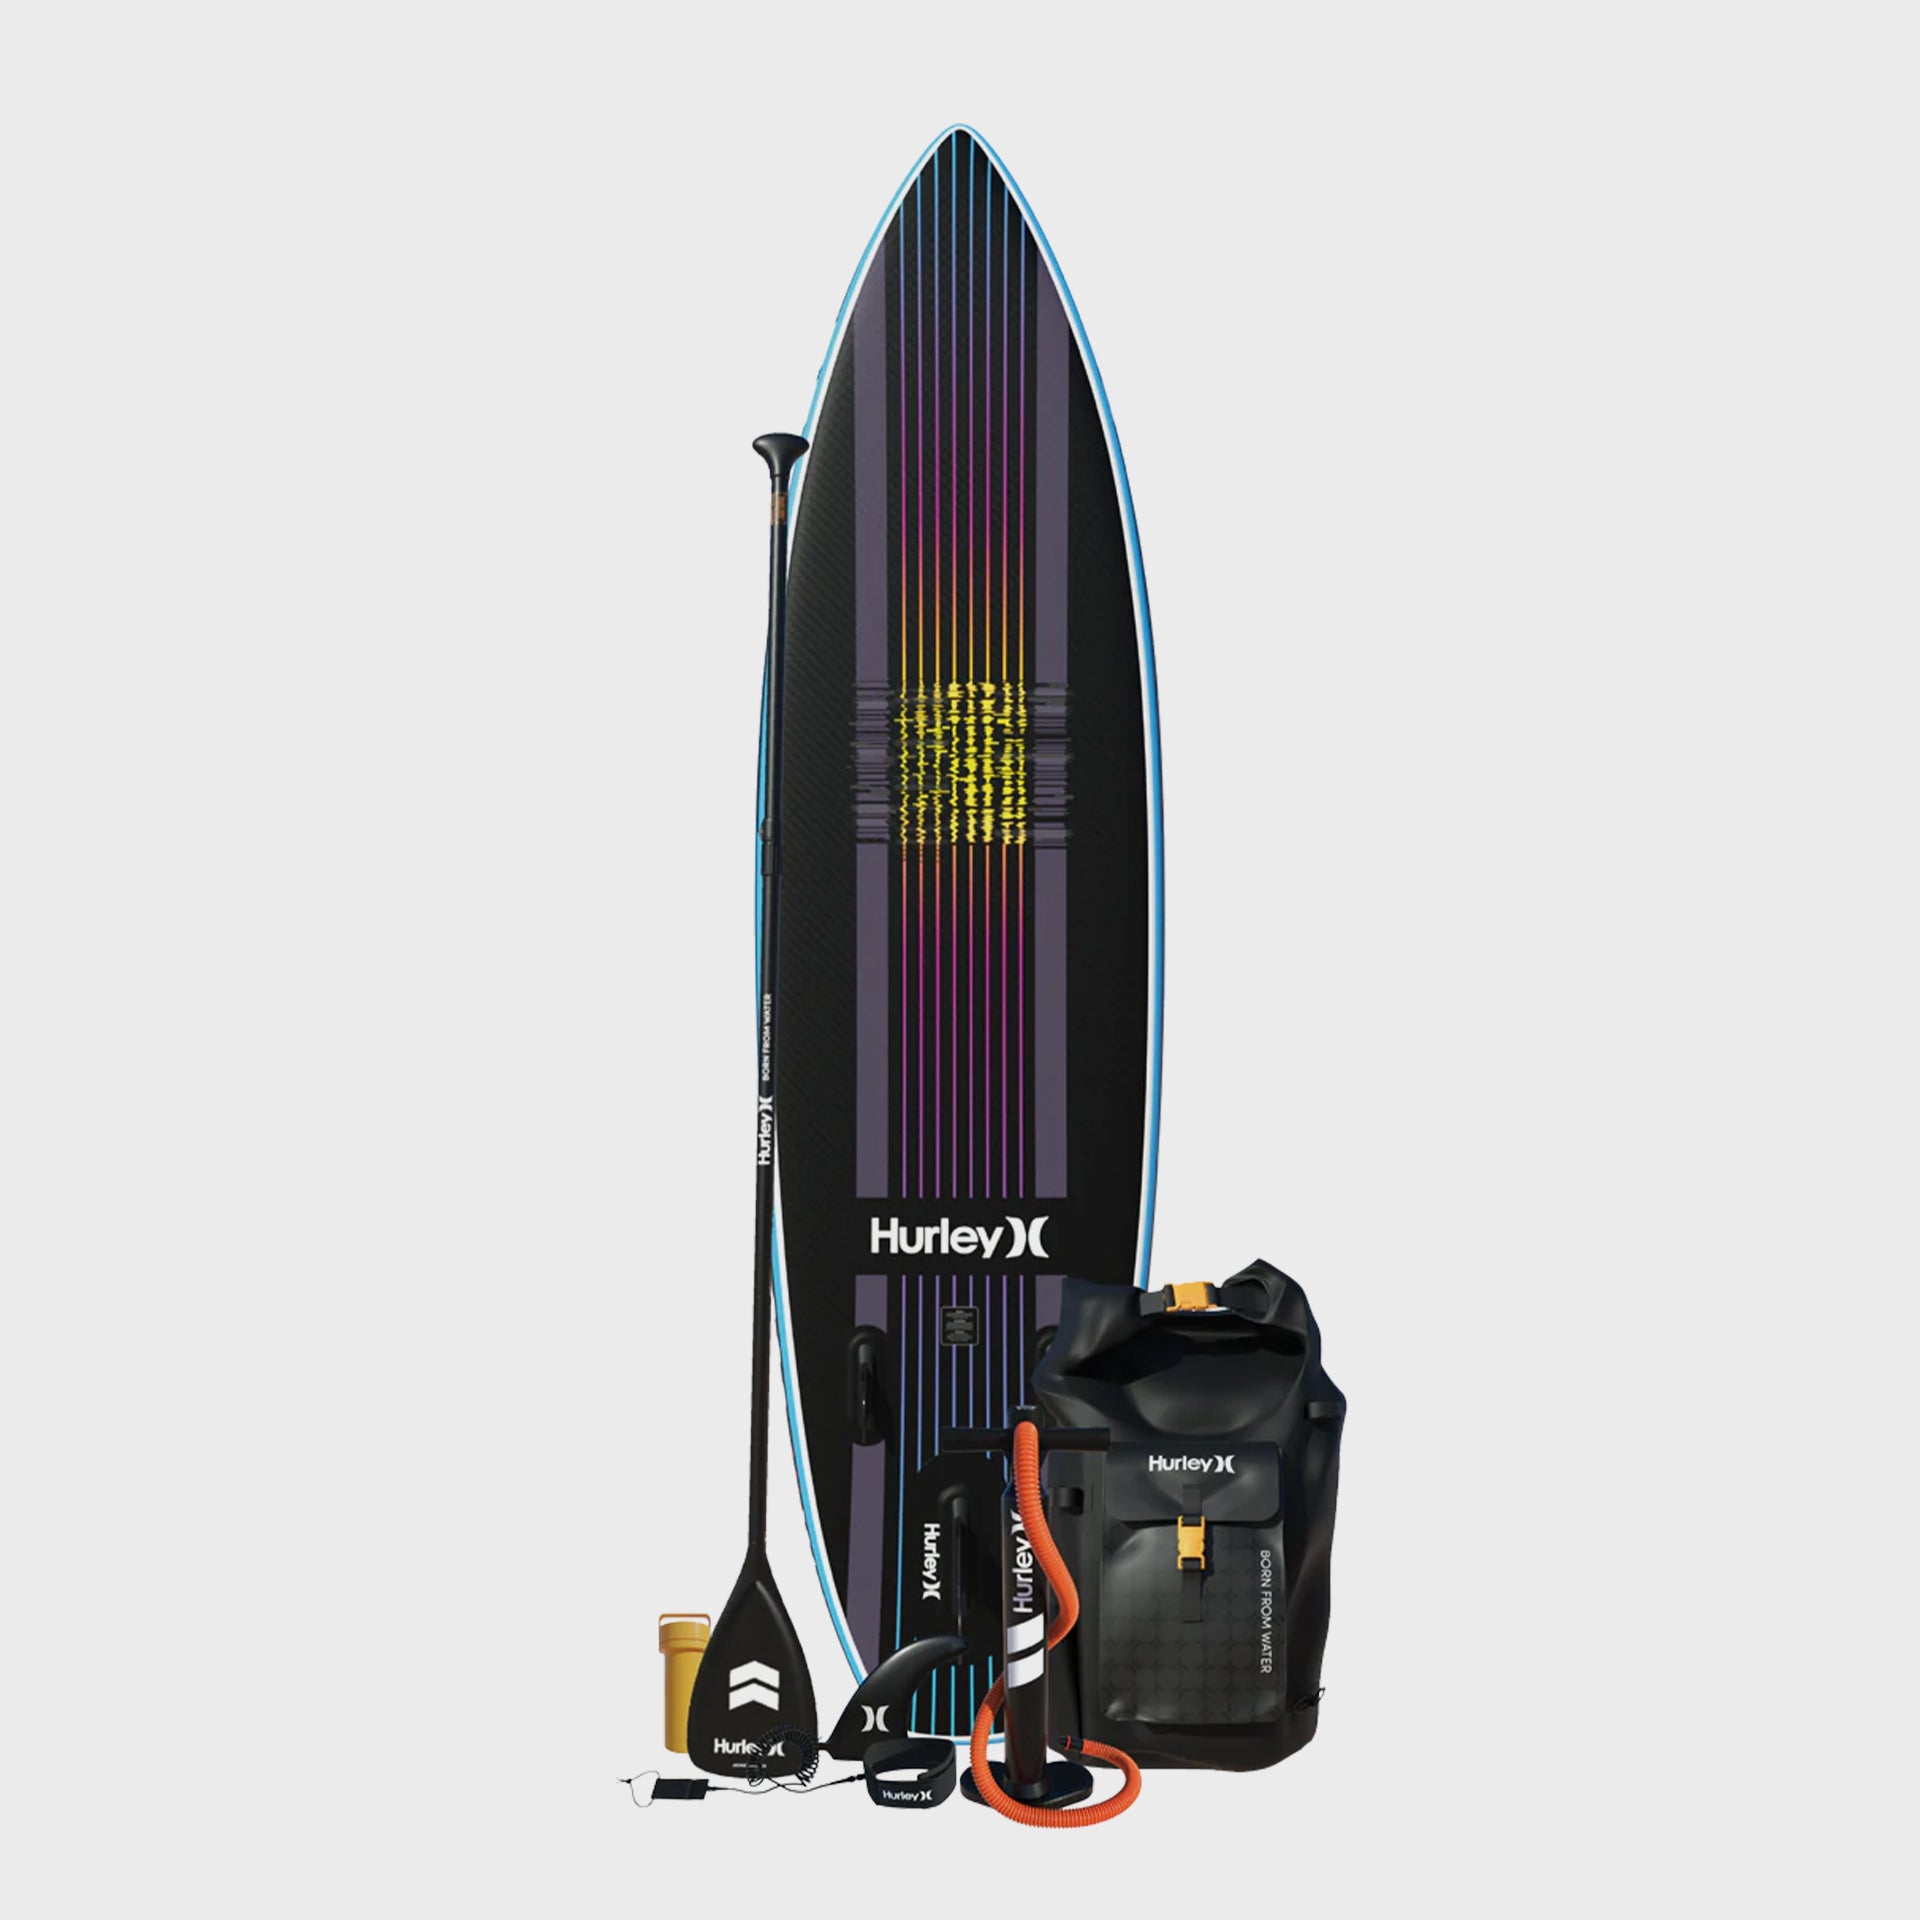 Hurley ApexTour Inflatable Paddle Board - 10'8 - Miami Neon - ManGo Surfing